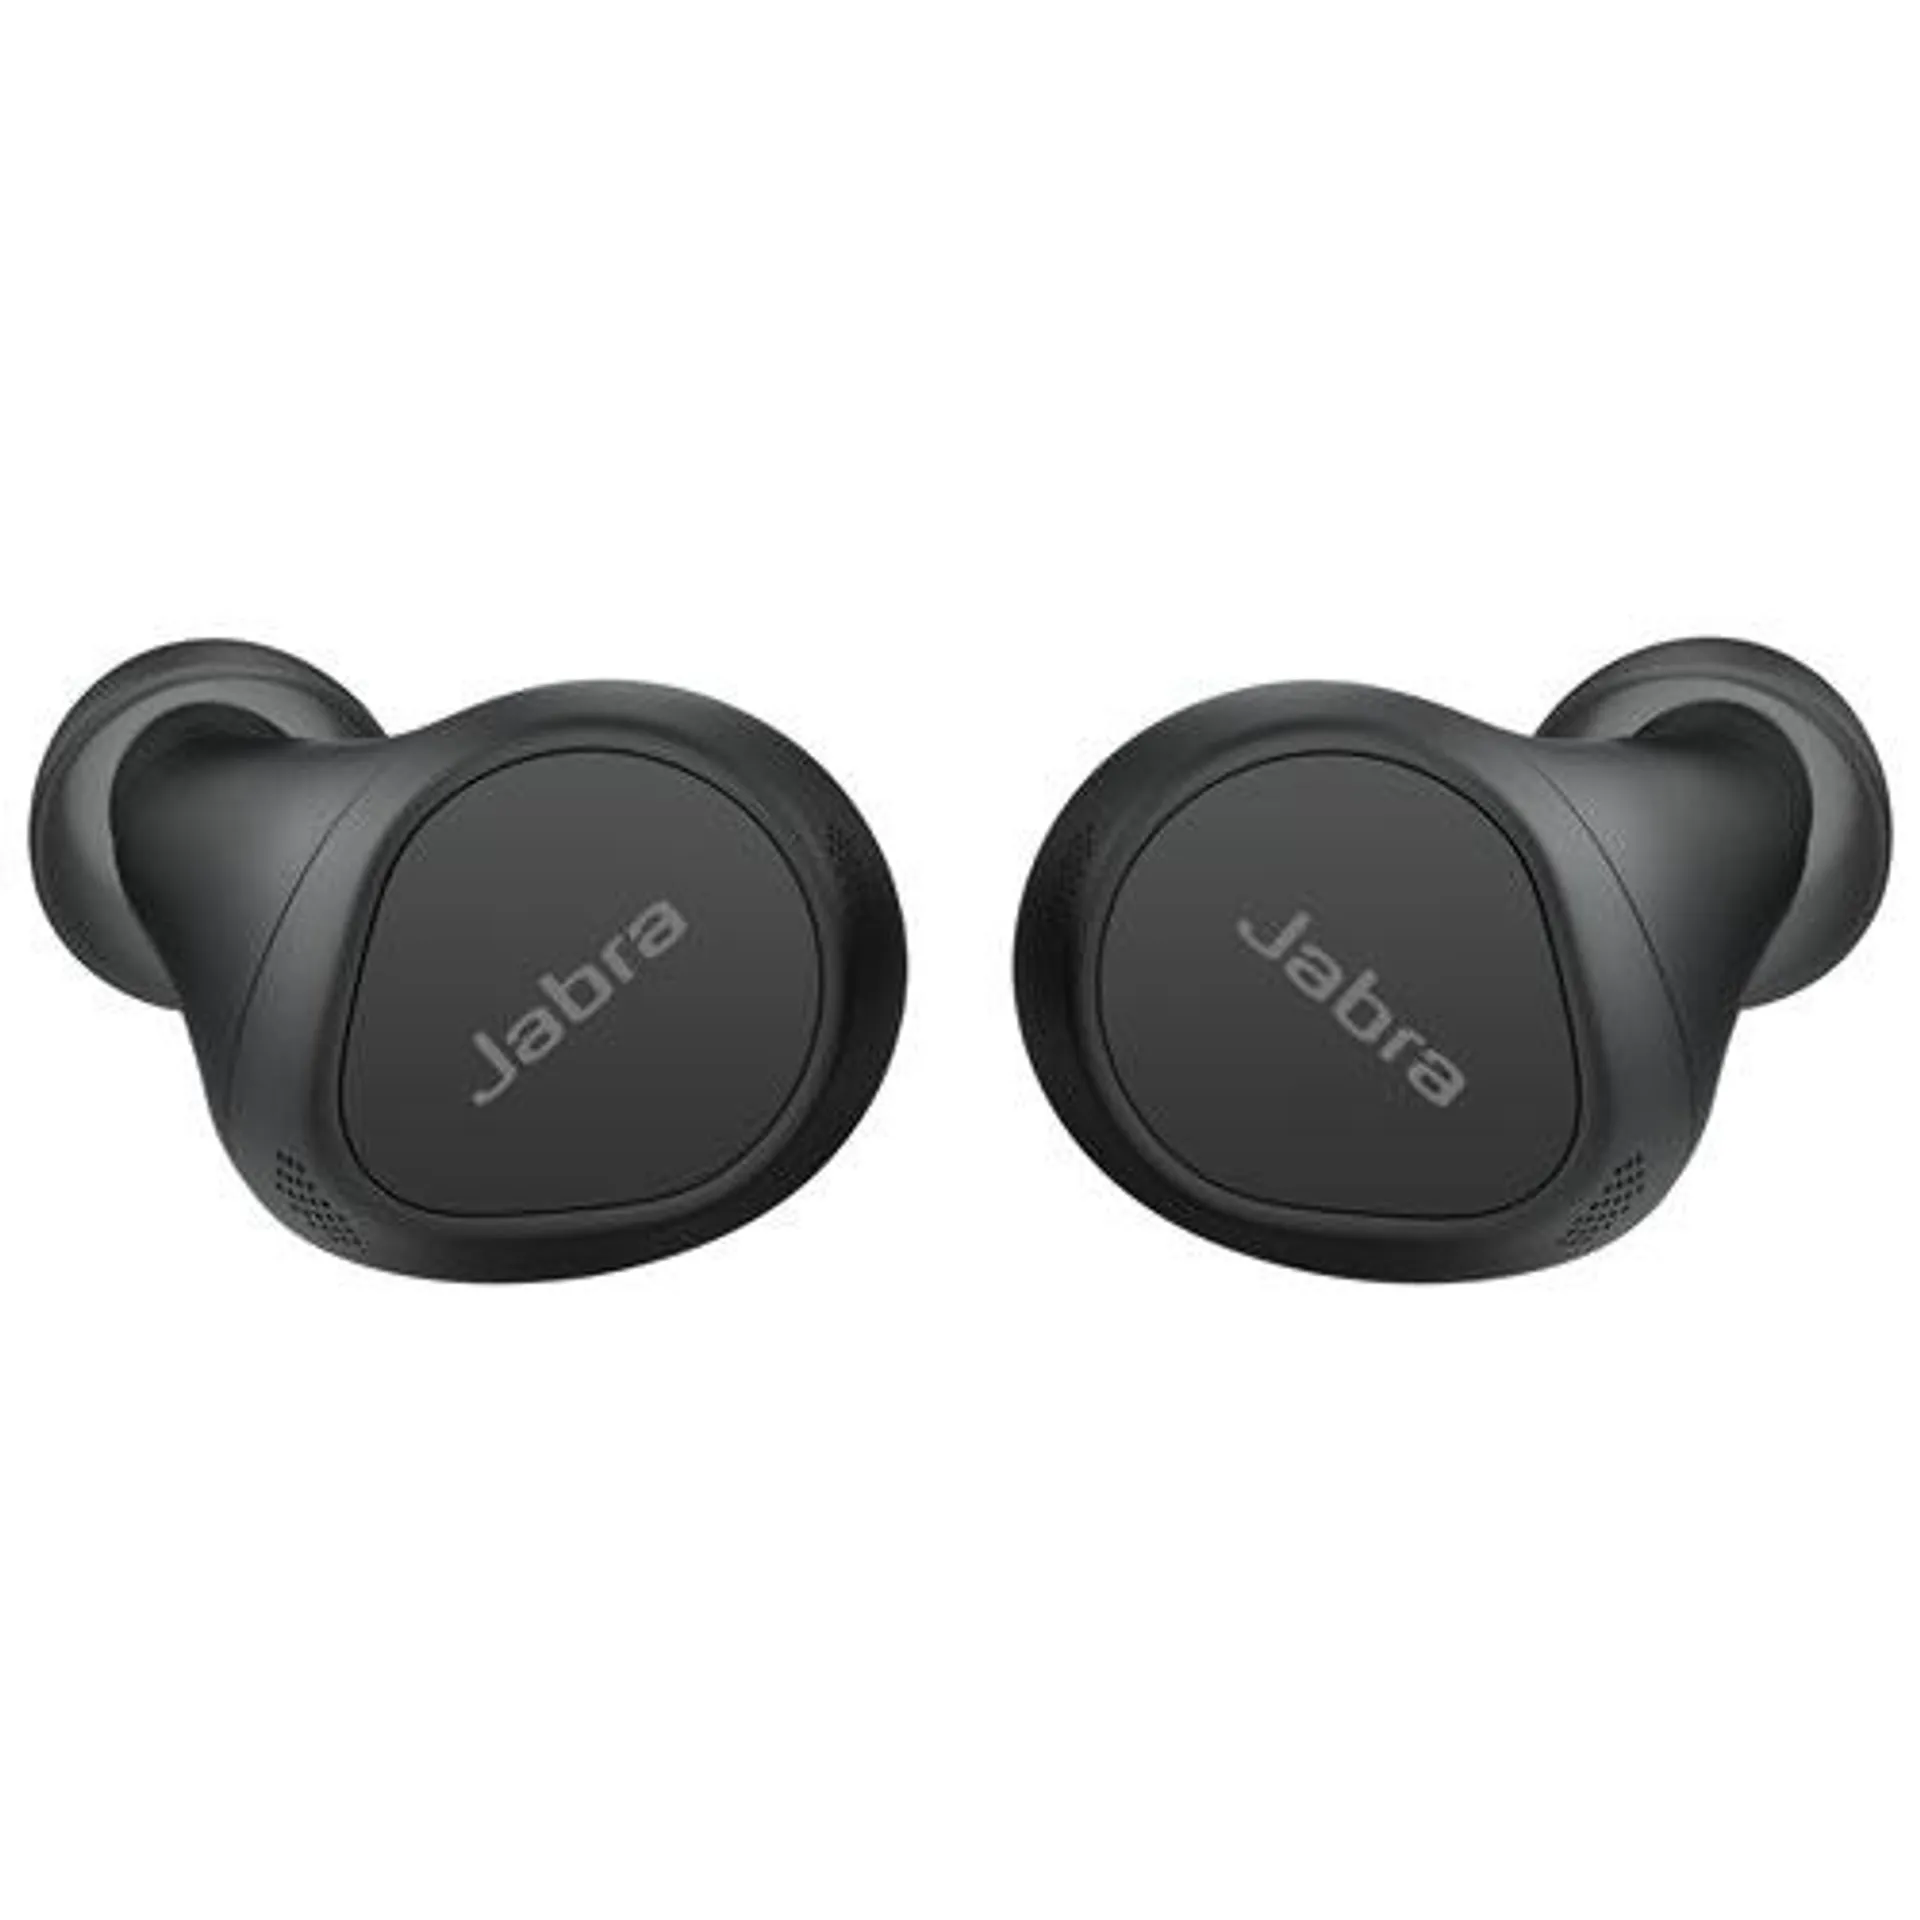 Jabra Elite 7 Pro In-Ear Noise Cancelling Truly Wireless Headphones - Black - Only at Best Buy